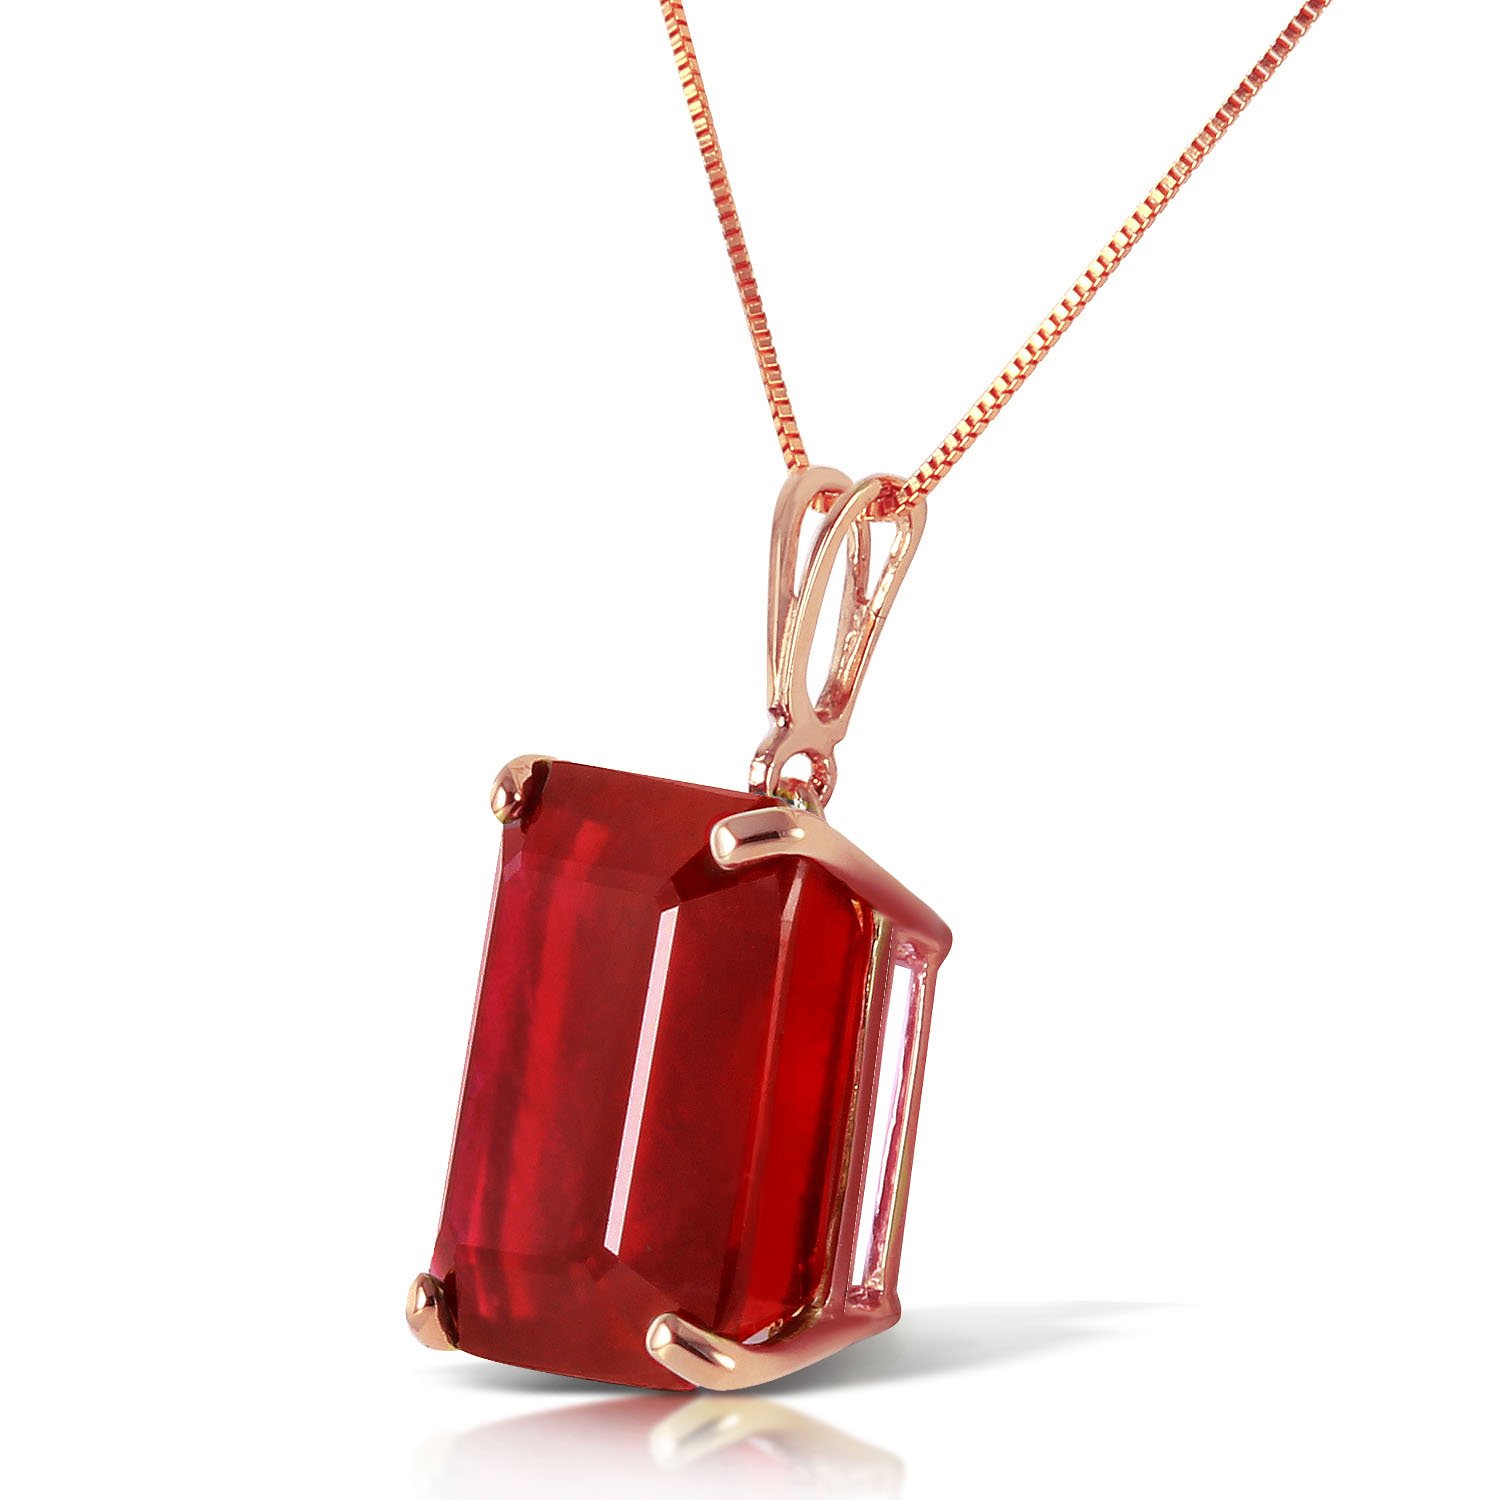 Galaxy Gold GG 6.5 CTW 14k Solid Gold Necklace Emerald Cut Ruby